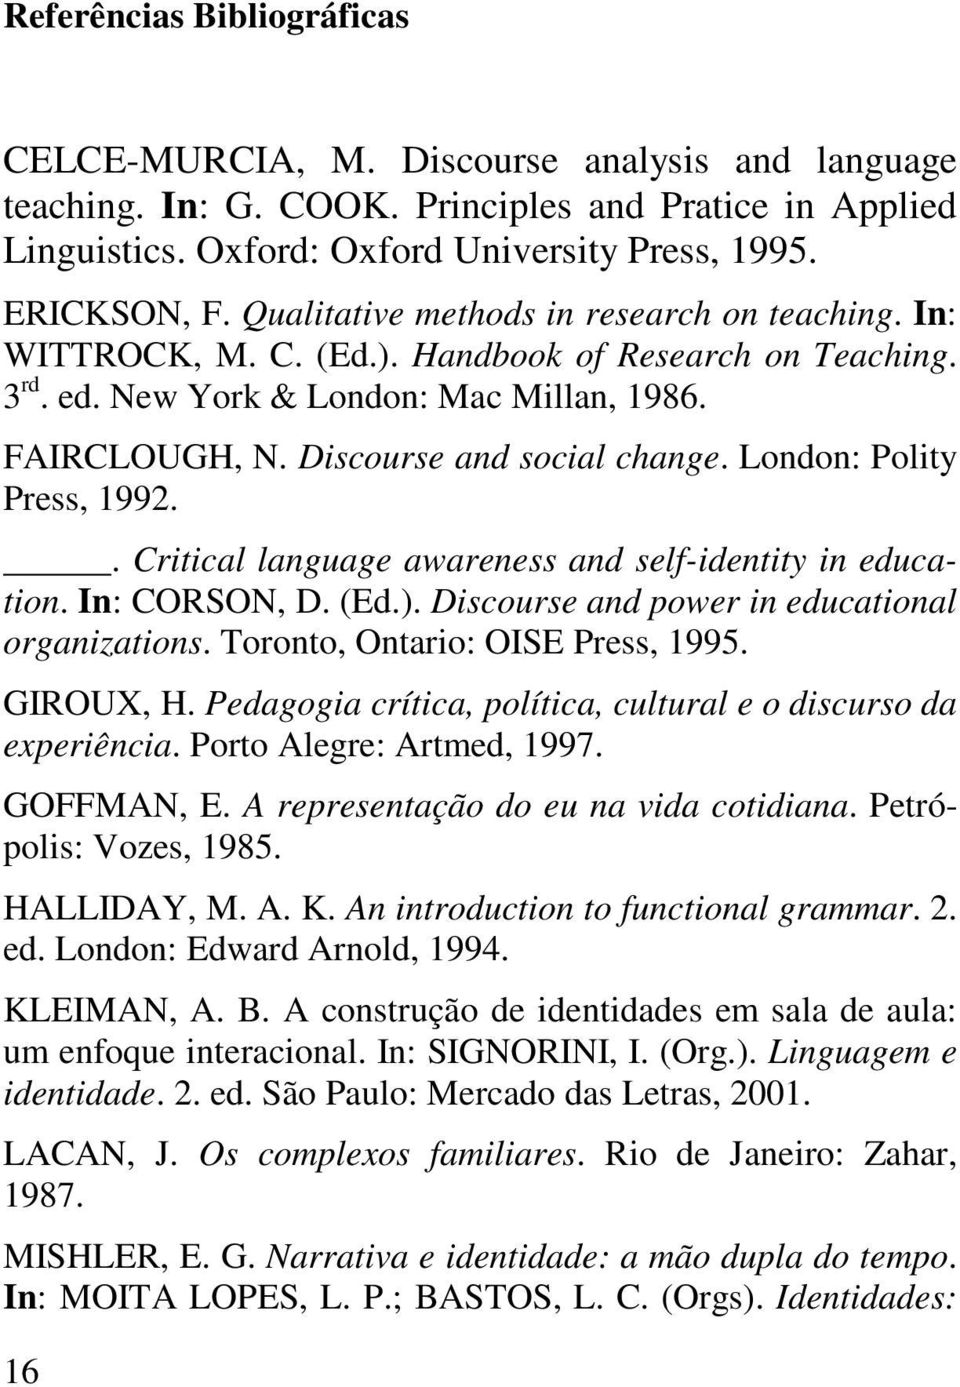 London: Polity Press, 1992.. Critical language awareness and self-identity in education. In: CORSON, D. (Ed.). Discourse and power in educational organizations. Toronto, Ontario: OISE Press, 1995.